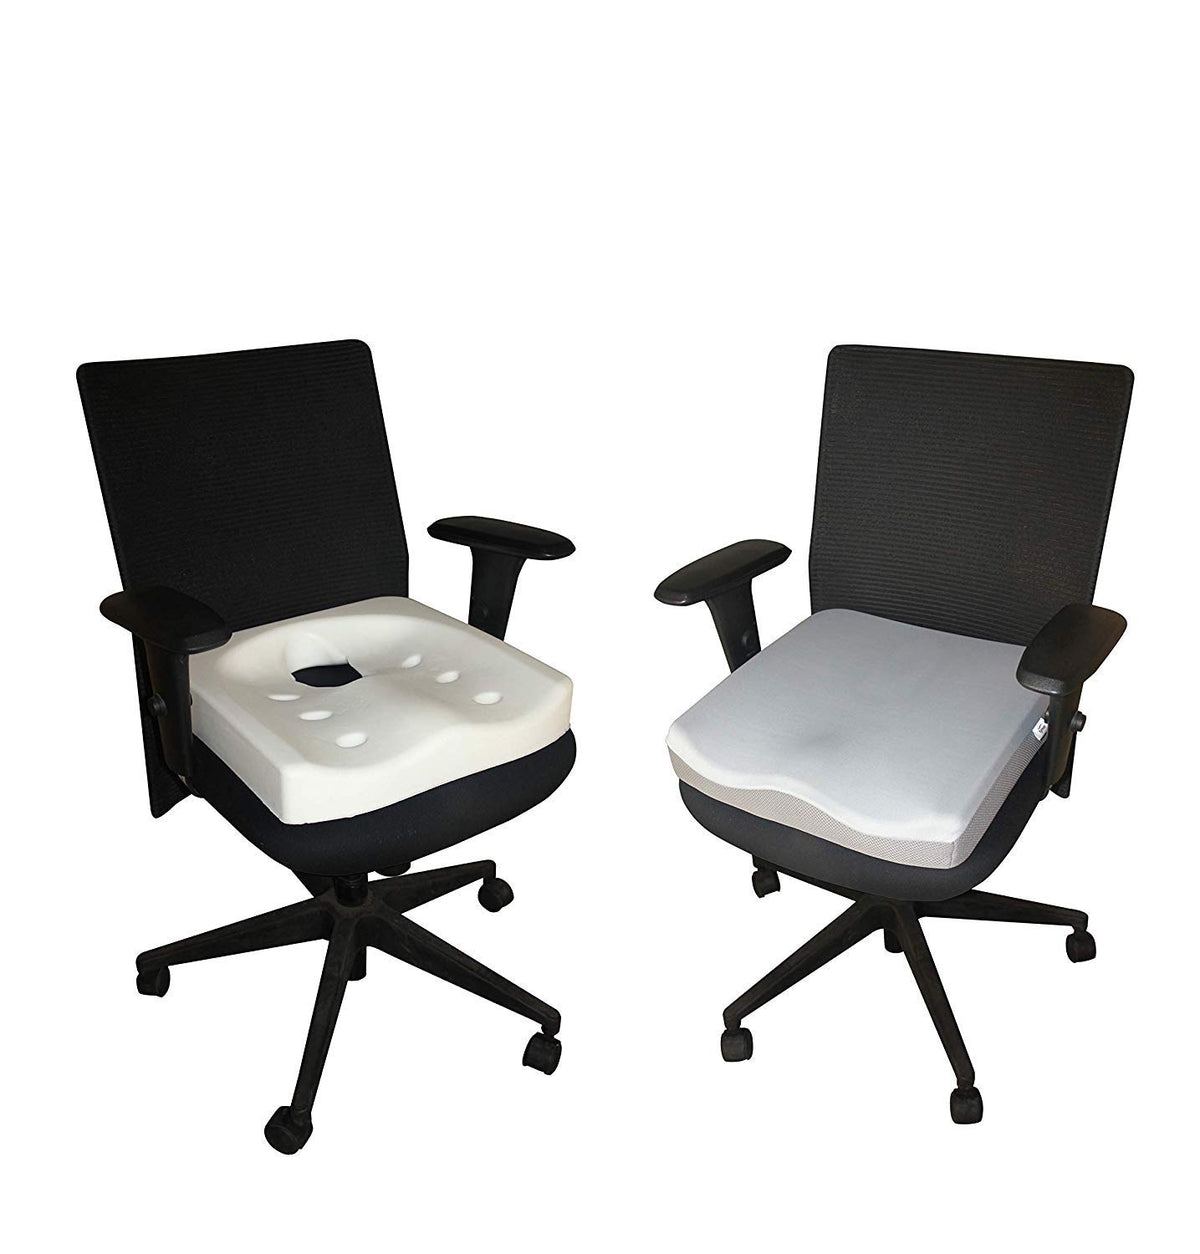 AHS Coccyx Seat Cushion and Lumbar Support Pillow for Office Chair-4